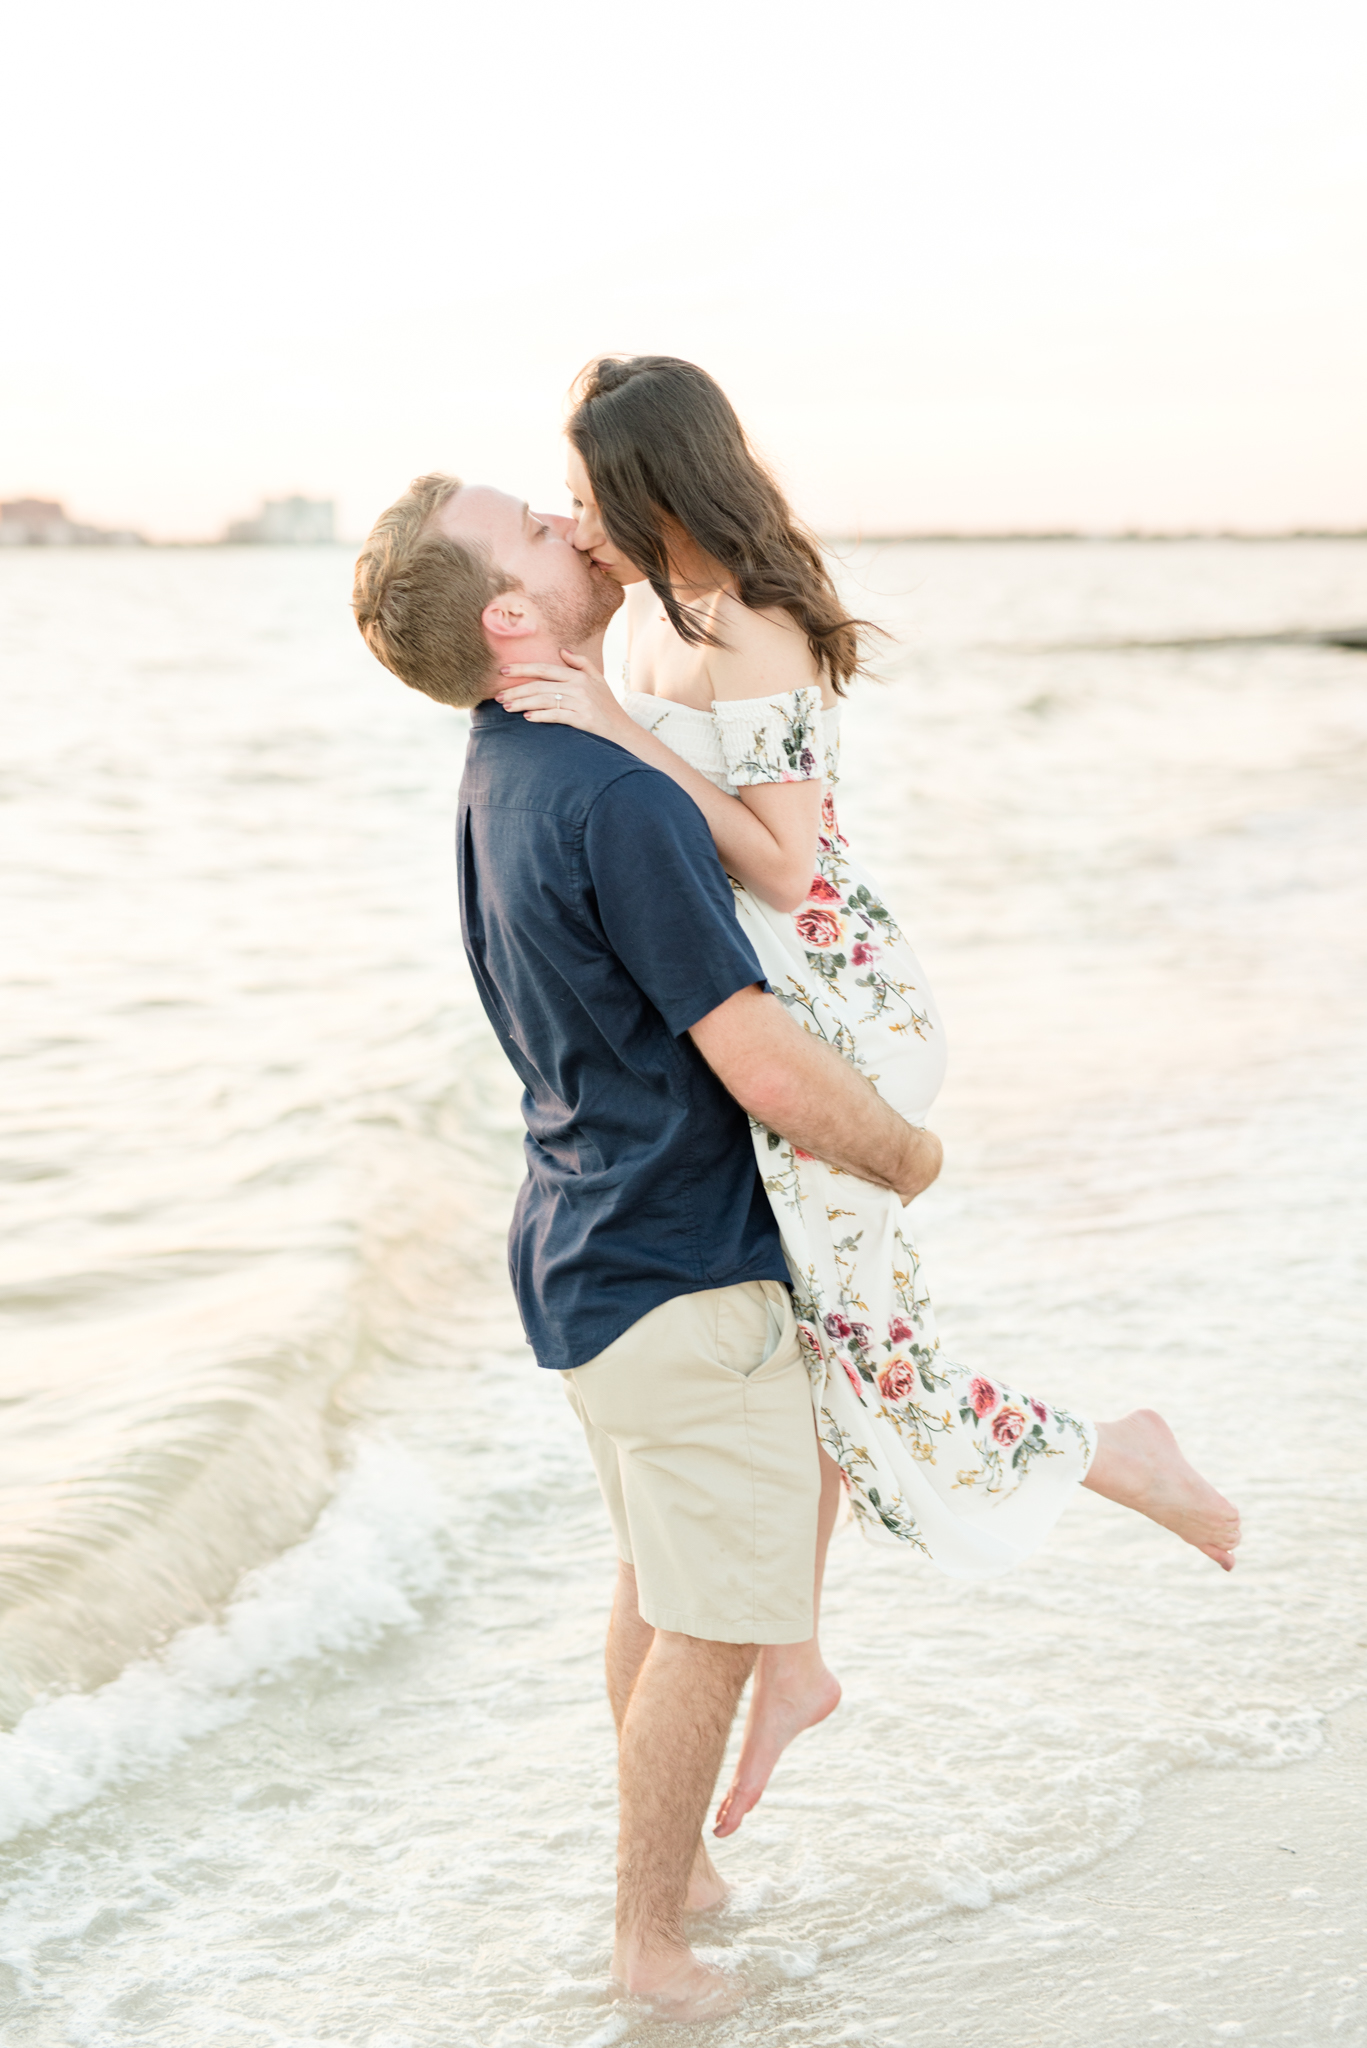 Groom stands in ocean and lifts fiance.